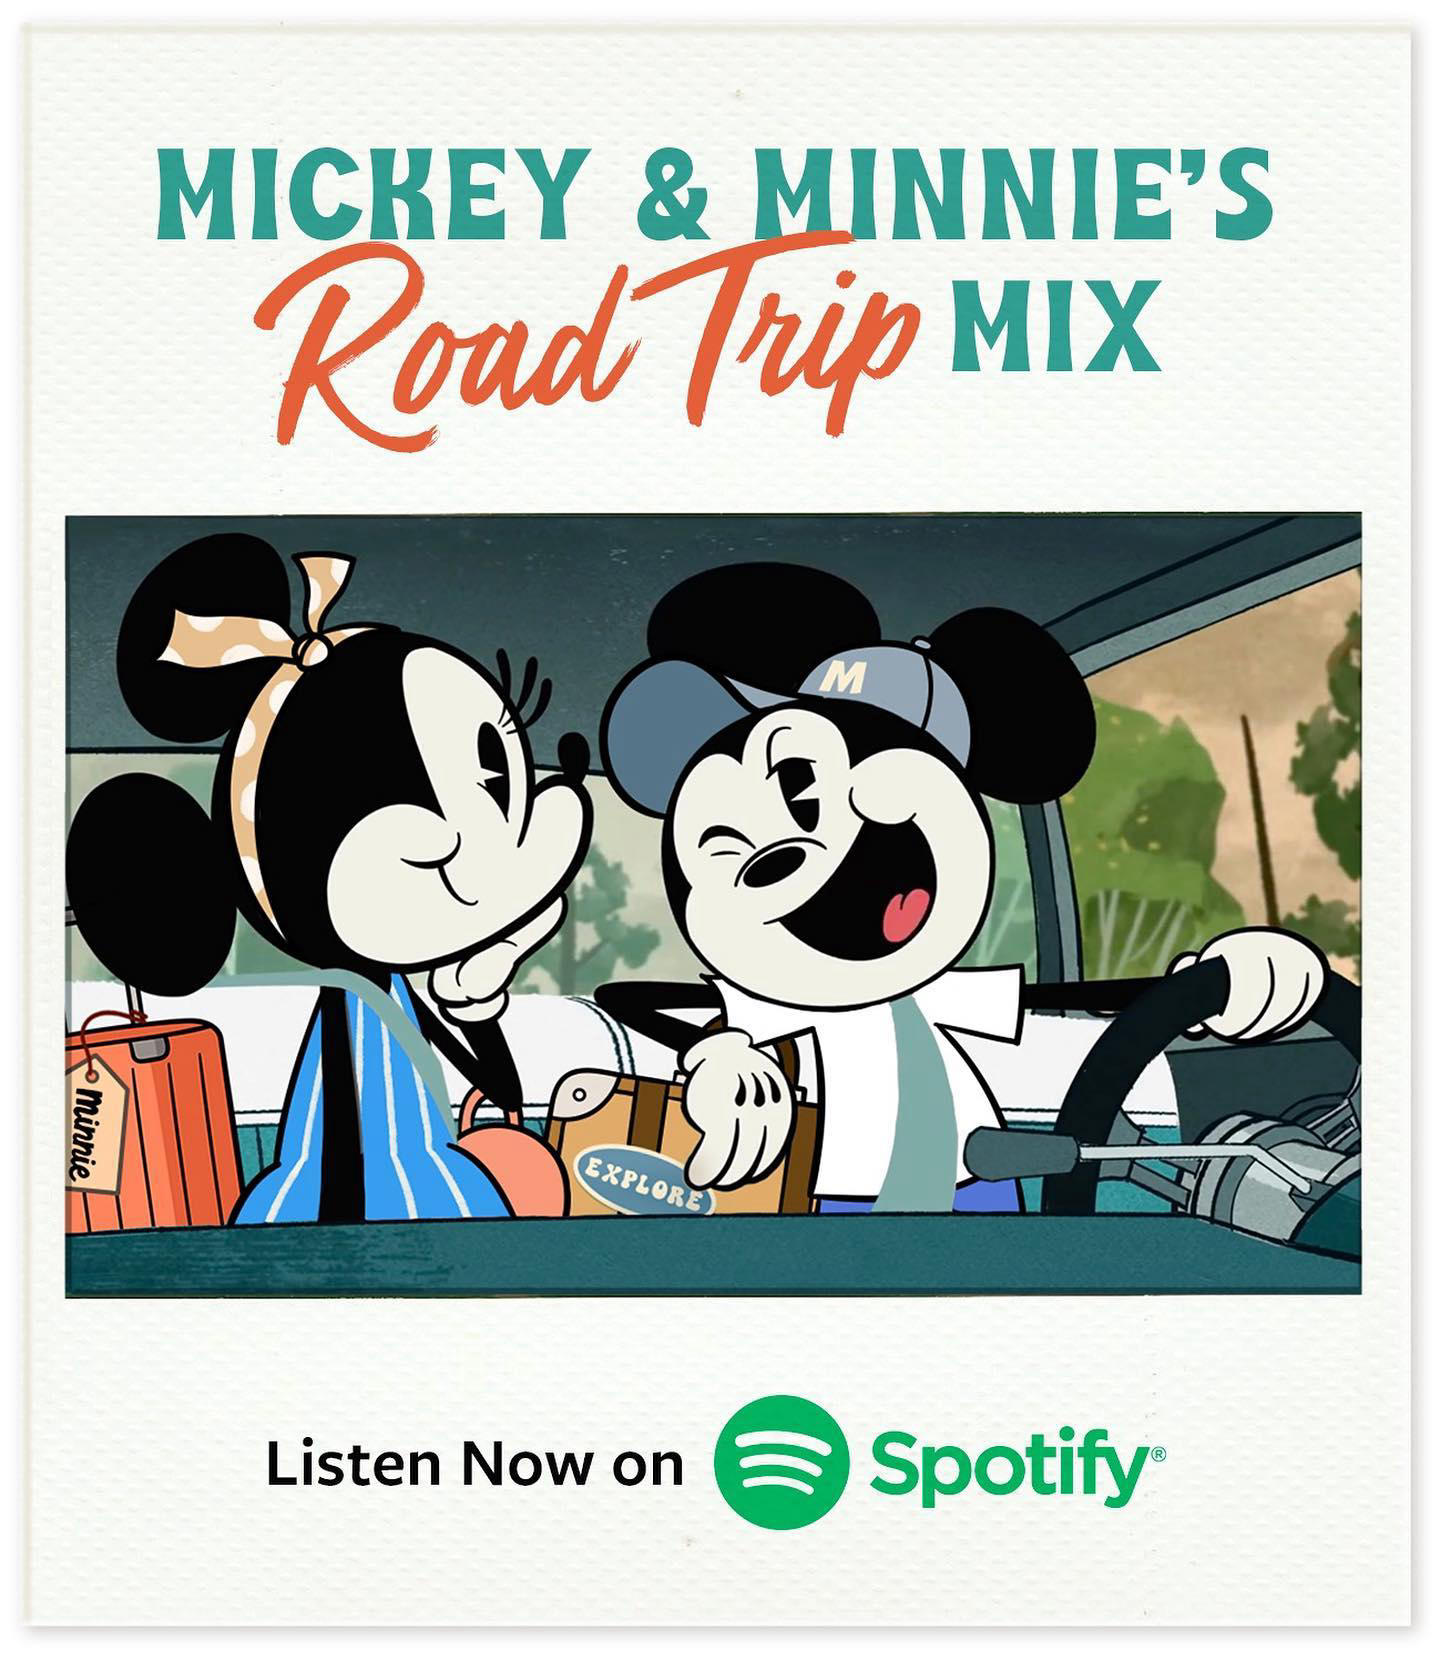 Mickey Mouse - Mickey curated the perfect car-tune mix for Minnie in honor of their upcoming birthda